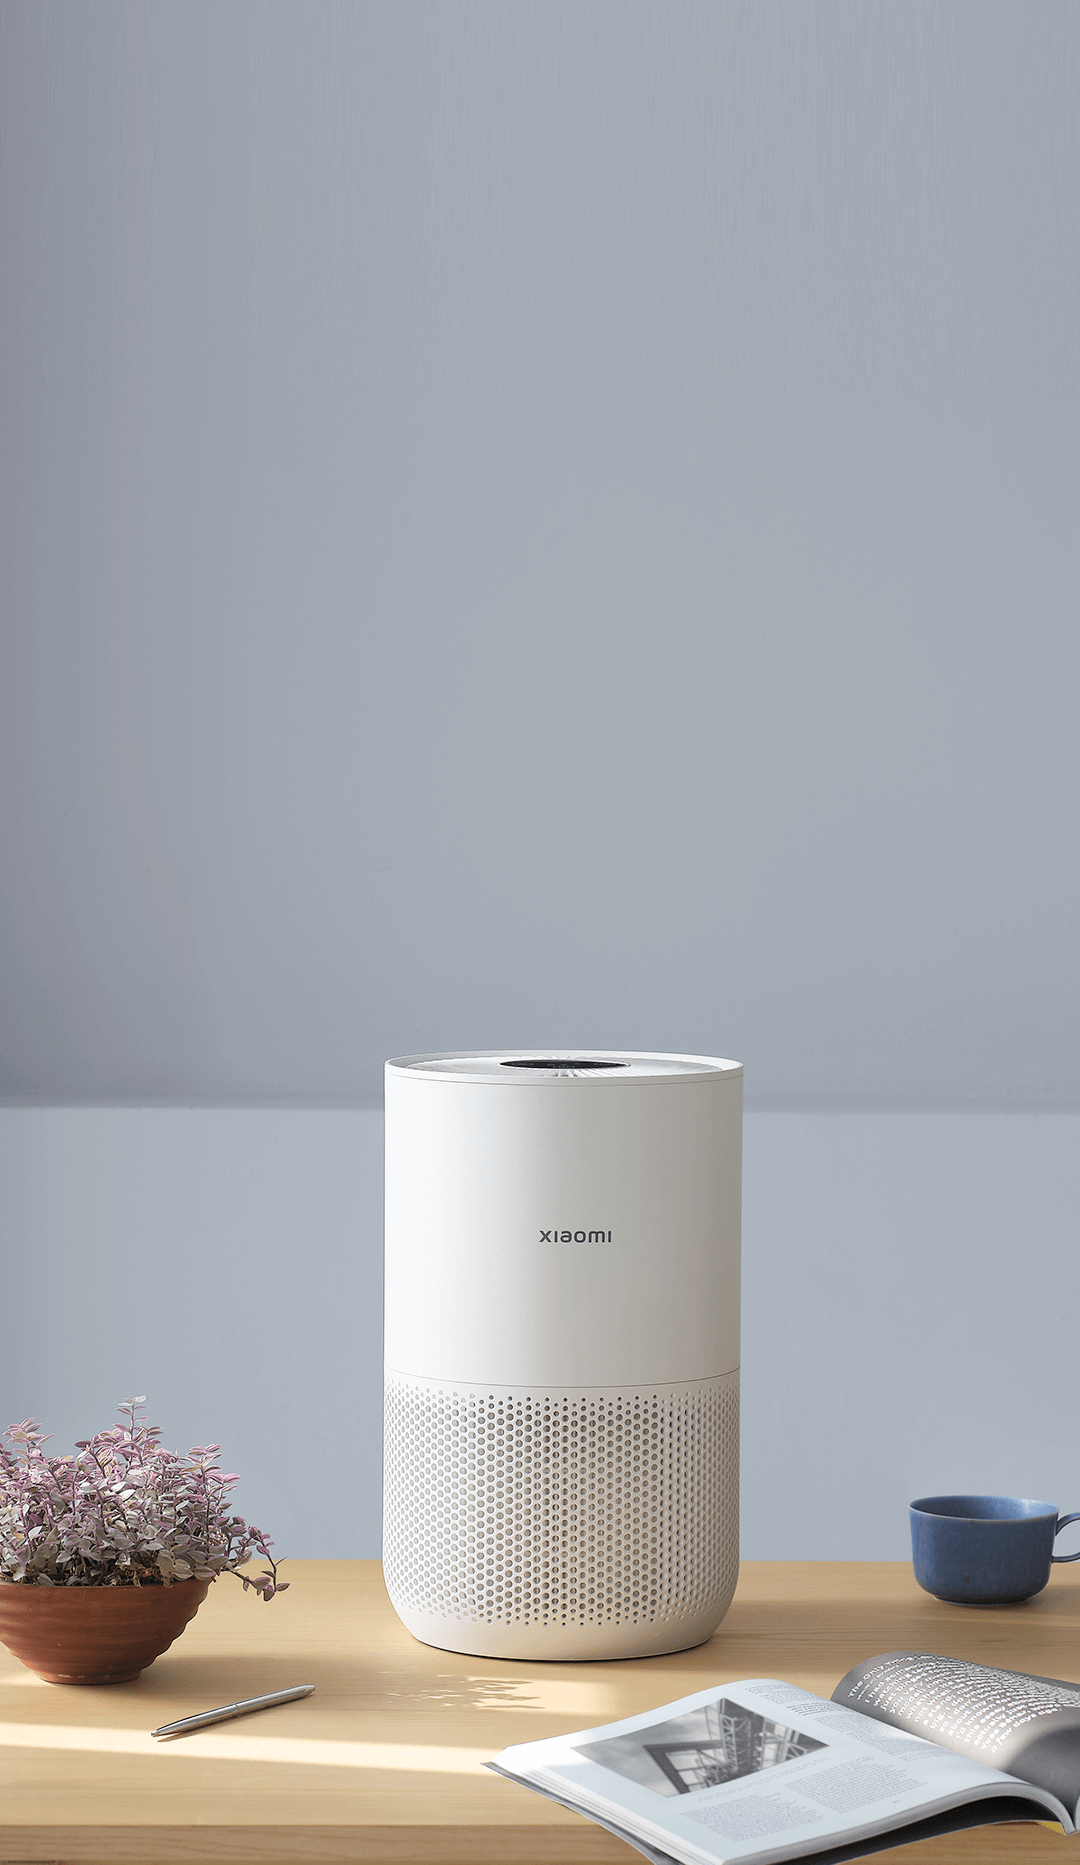 Xiaomi Smart Air Purifier 4 Compact Review - Air Quality Tests